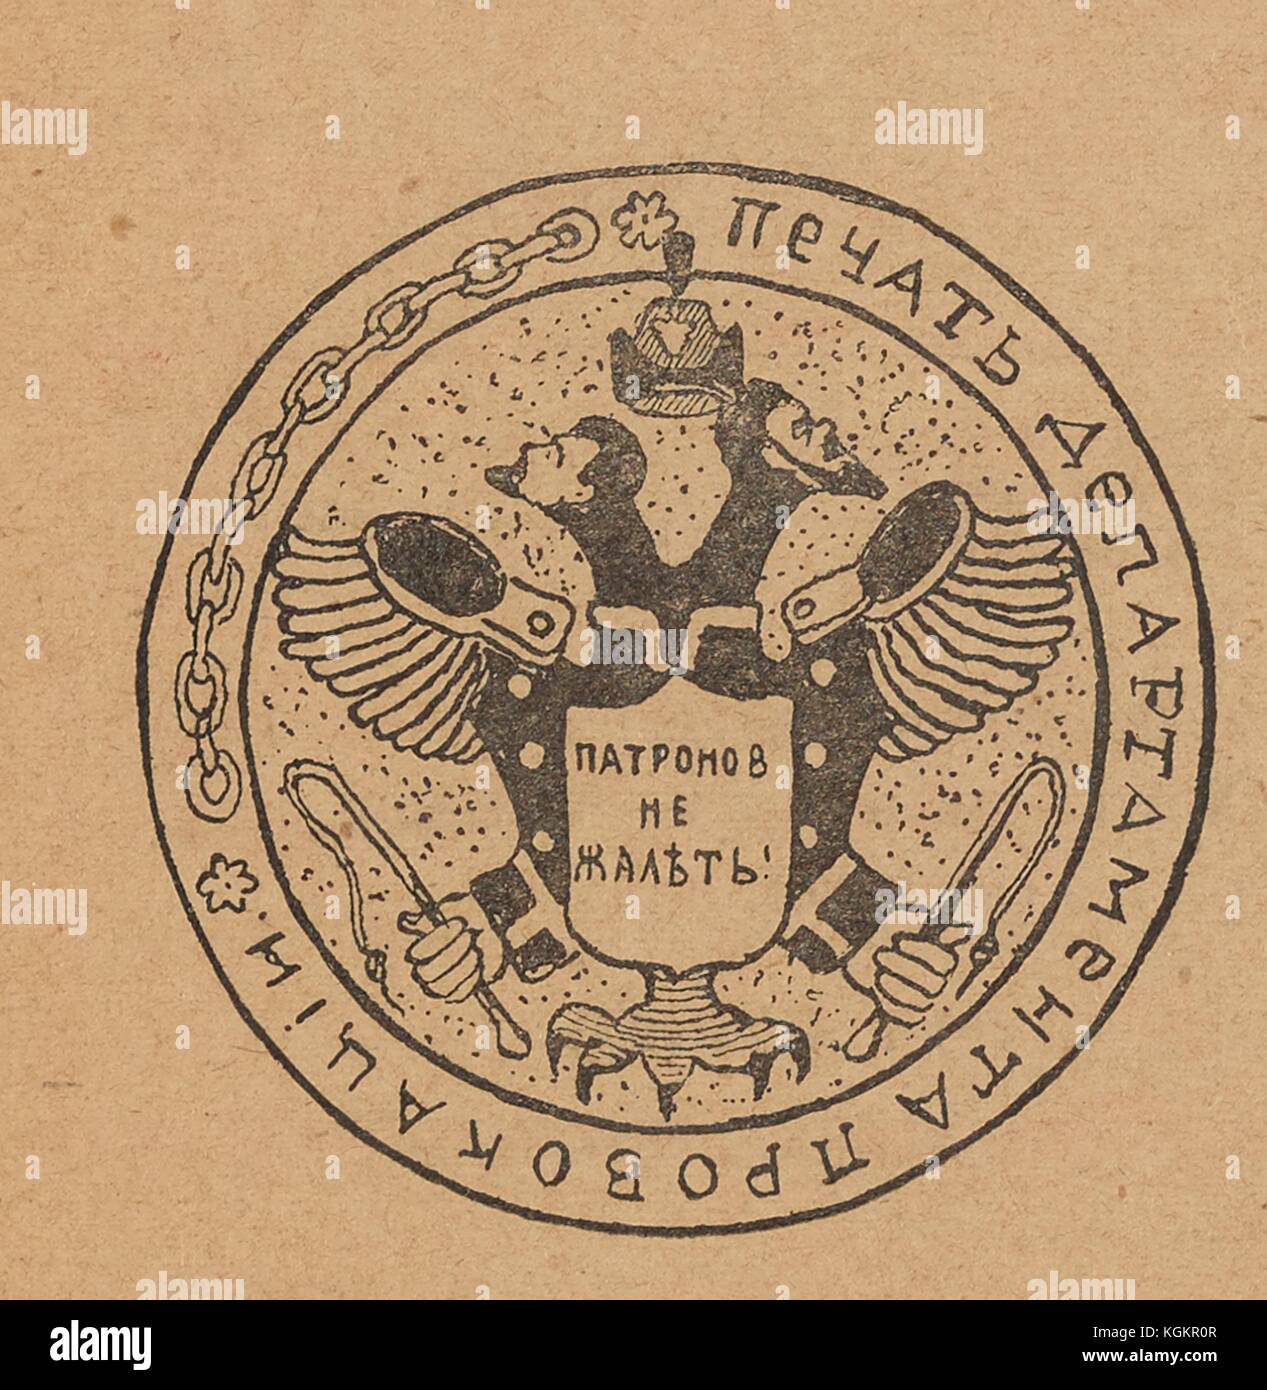 Cartoon from the Russian satirical journal Burelom (Deadfall) depicting the seal of the Department for Protecting the Public Security and Order (Okhrana) in which the heads of the imperial double headed eagle have been replaced with the heads of Tsar Nicholas II and Sergei Savich, the Chief of Gendarmes, with text reading 'Seal of the department of provocation; do not spare your ammunition!' referring to the agents provocateurs used by Okhrana as well as the Bloody Sunday massacre of 1905, 1905. Stock Photo